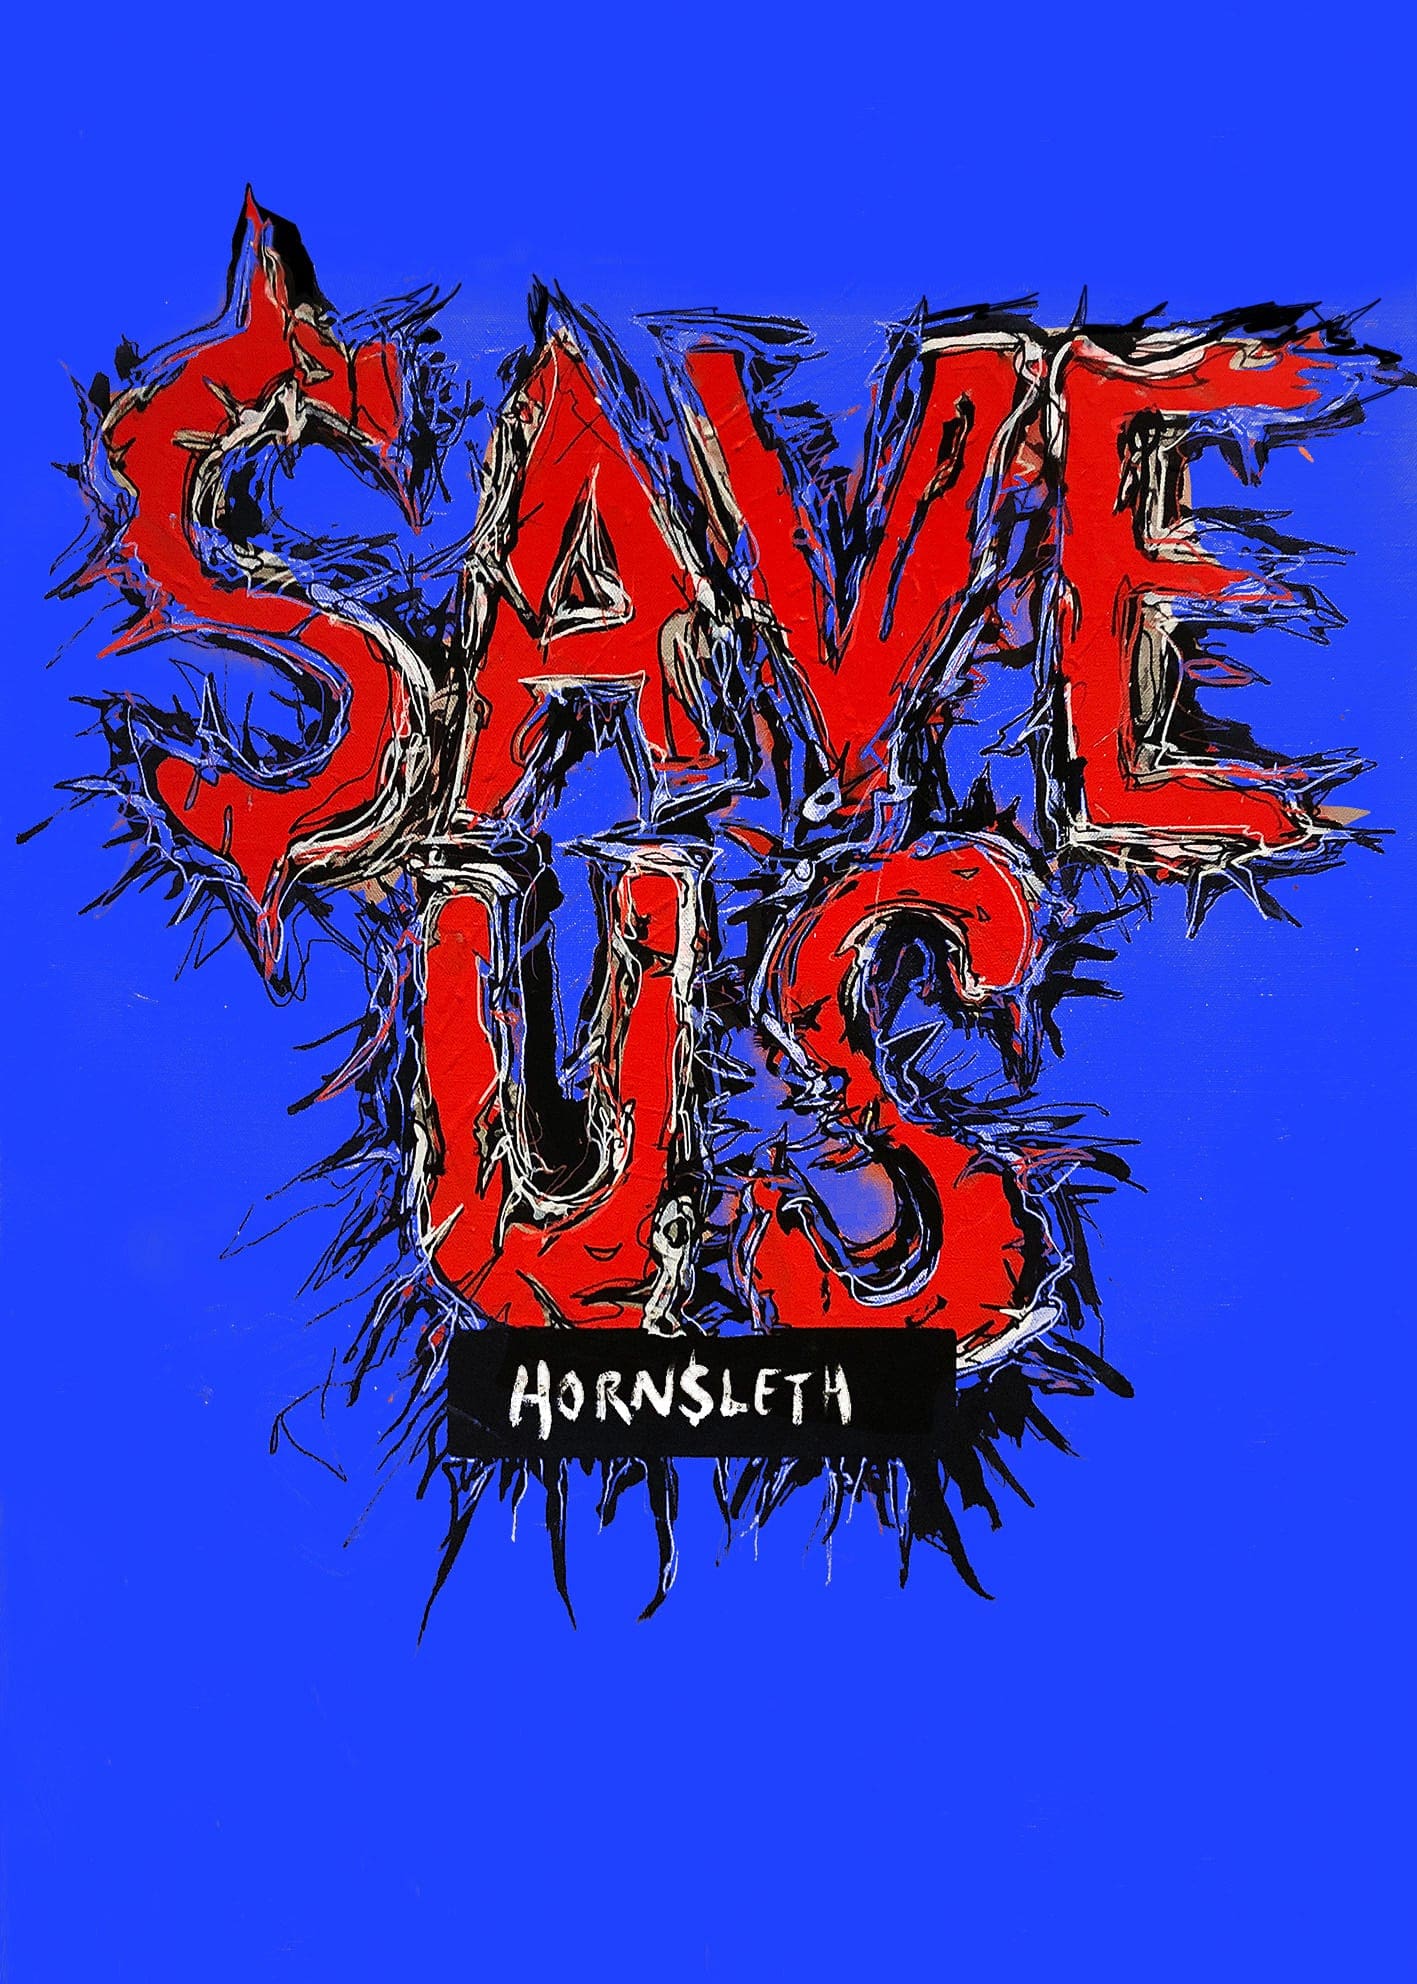 Save Us - Poster by Hornsleth